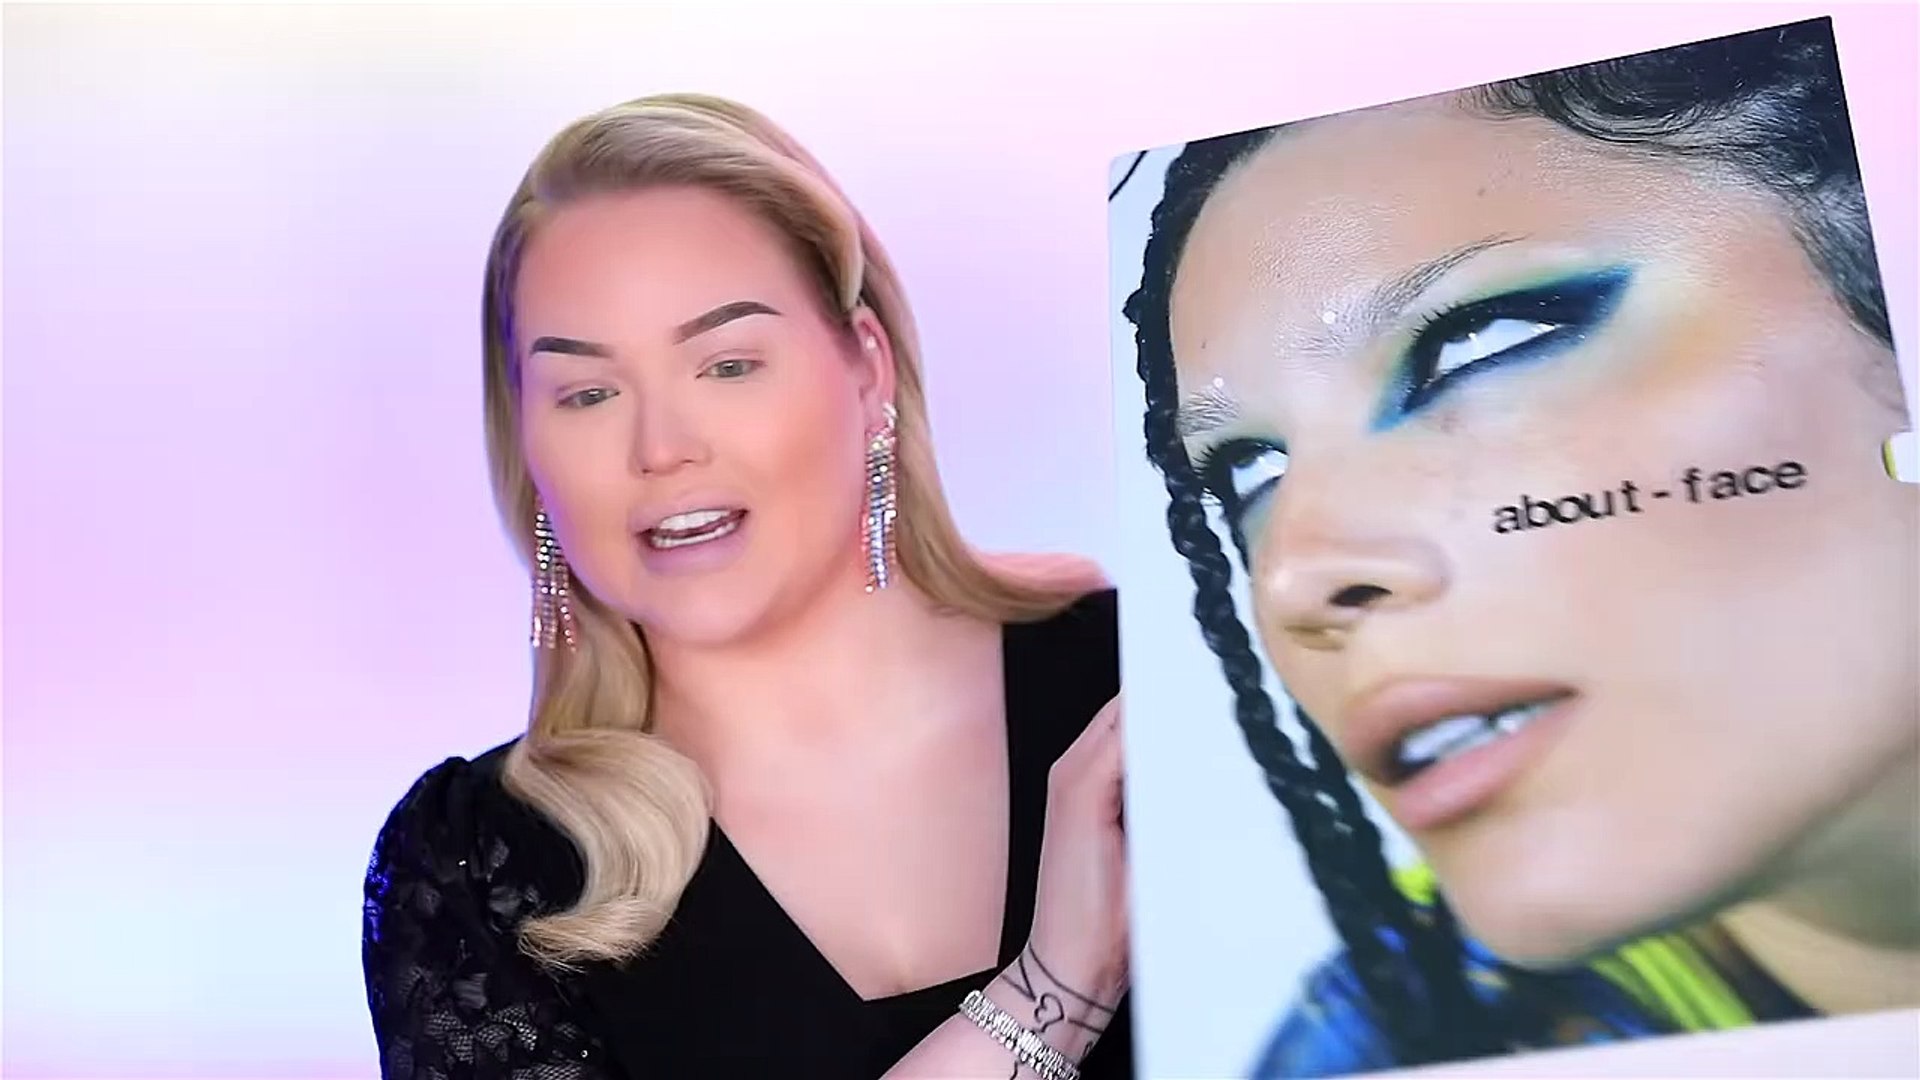 Halsey Collab Canceled? ABOUT-FACE Review!